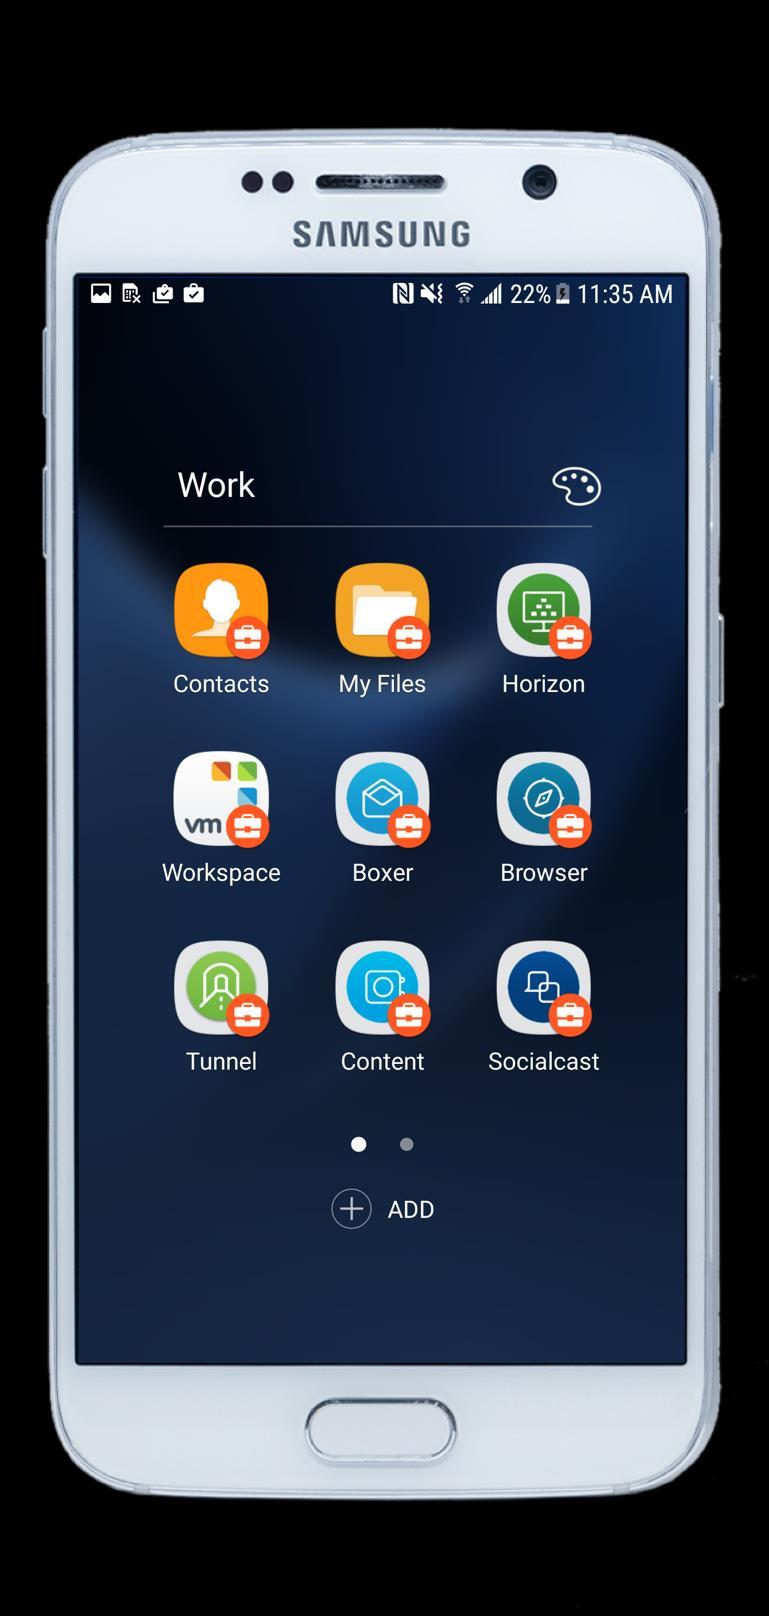 Deploy a Work Profile for Personal Devices Built-in to the Android operating system Visual separation of work and personal with badged icons VMworld 2017 Prevent sharing